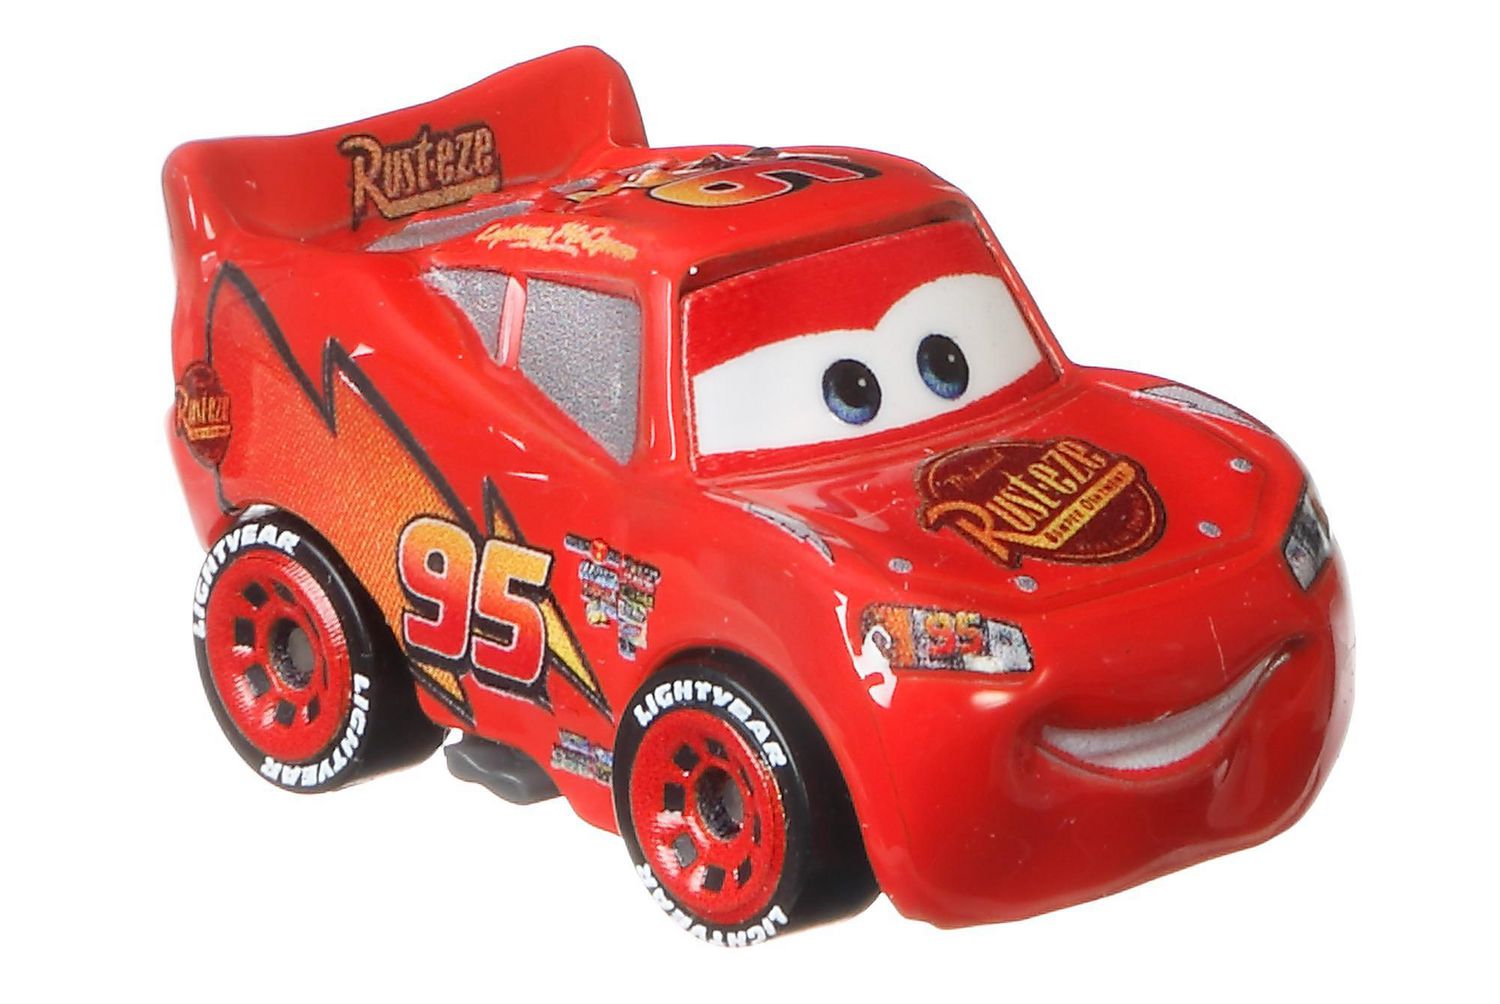 Collectible Racecar Automobile Toys Based on Cars Movies Miniature For Kids Age 3 and Older Disney and Pixar Cars Movie Die-cast Character Vehicles 